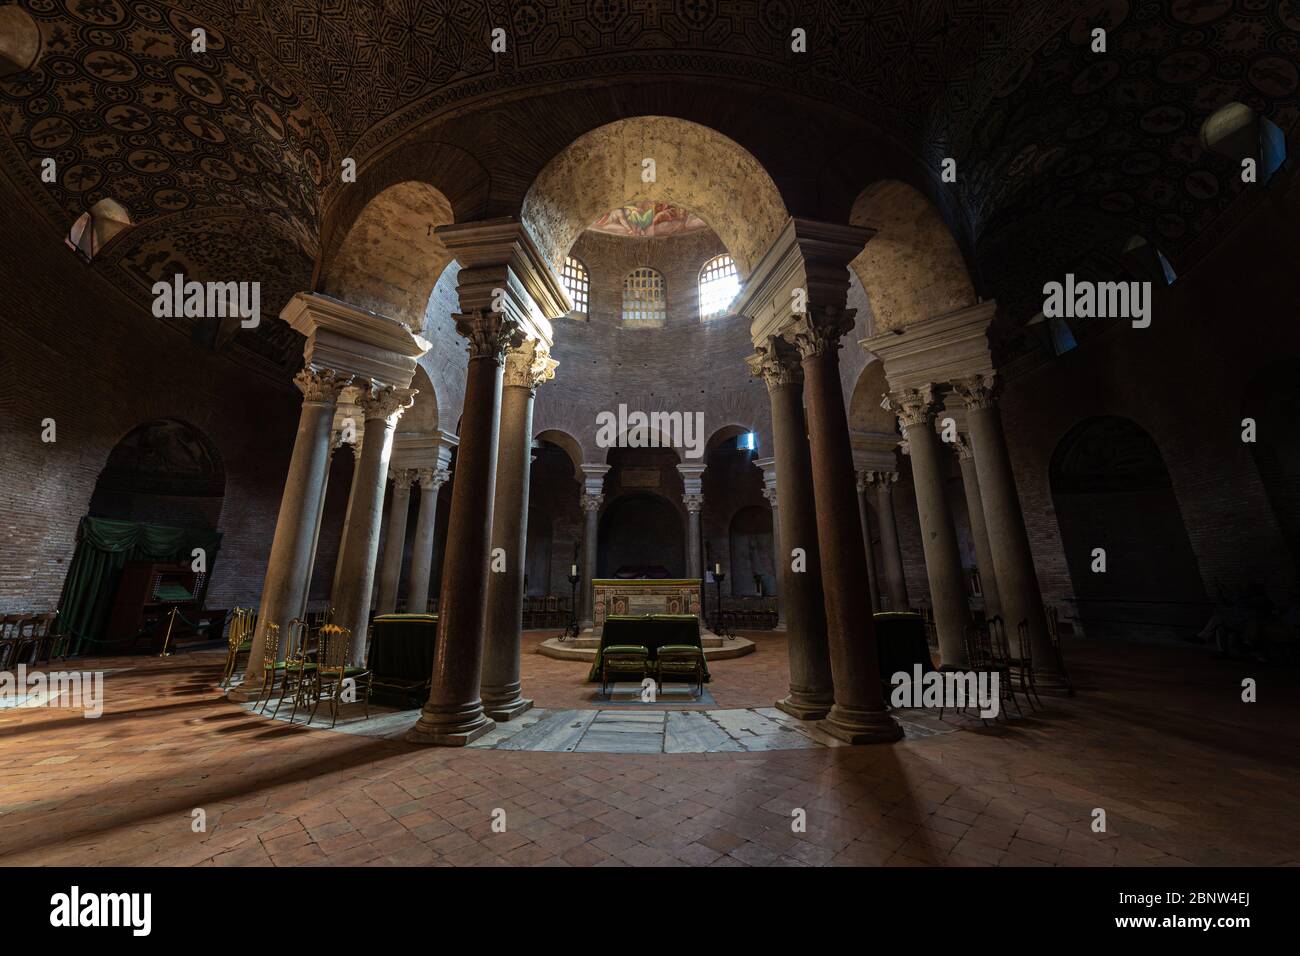 ROME, ITALY - AUGUST 10, 2019: the Mausoleum of Santa Costanza in Rome, Italy Stock Photo